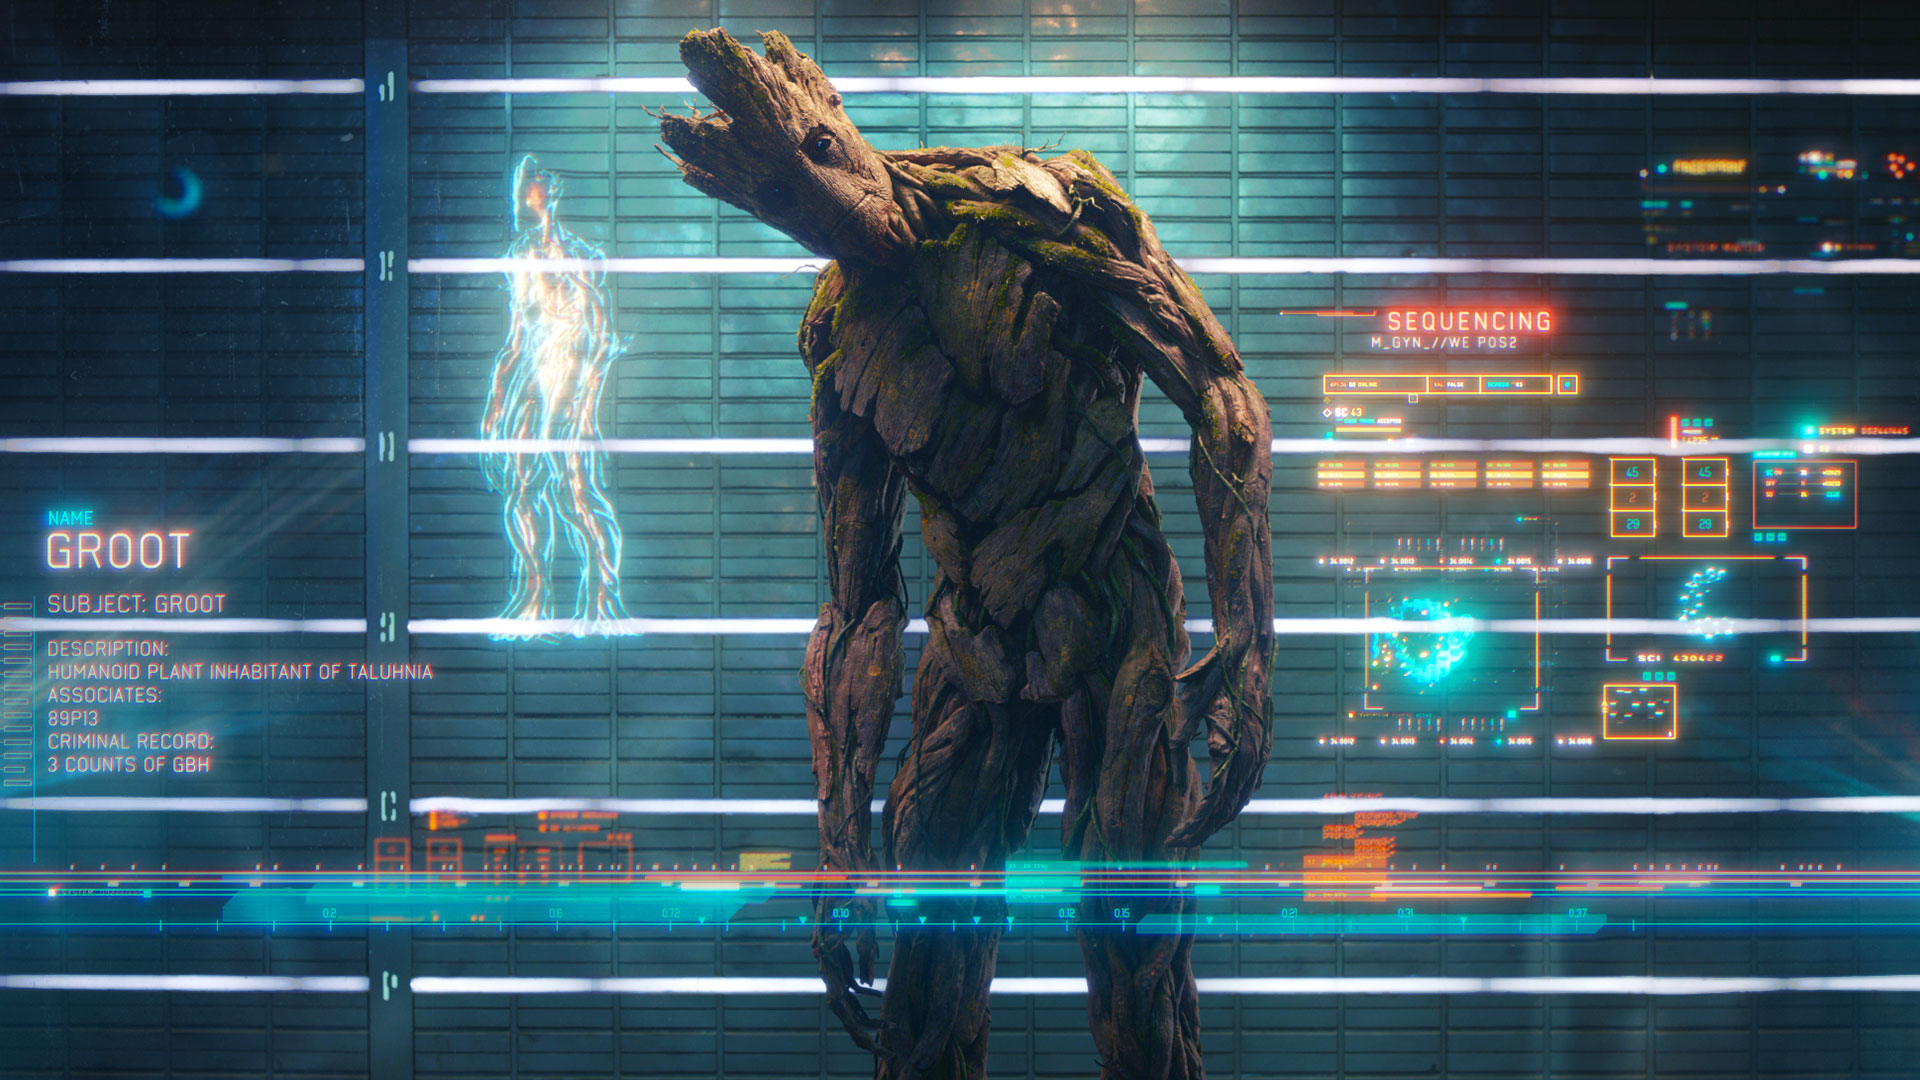 Ronan From Guardians Of The Galaxy Wallpapers